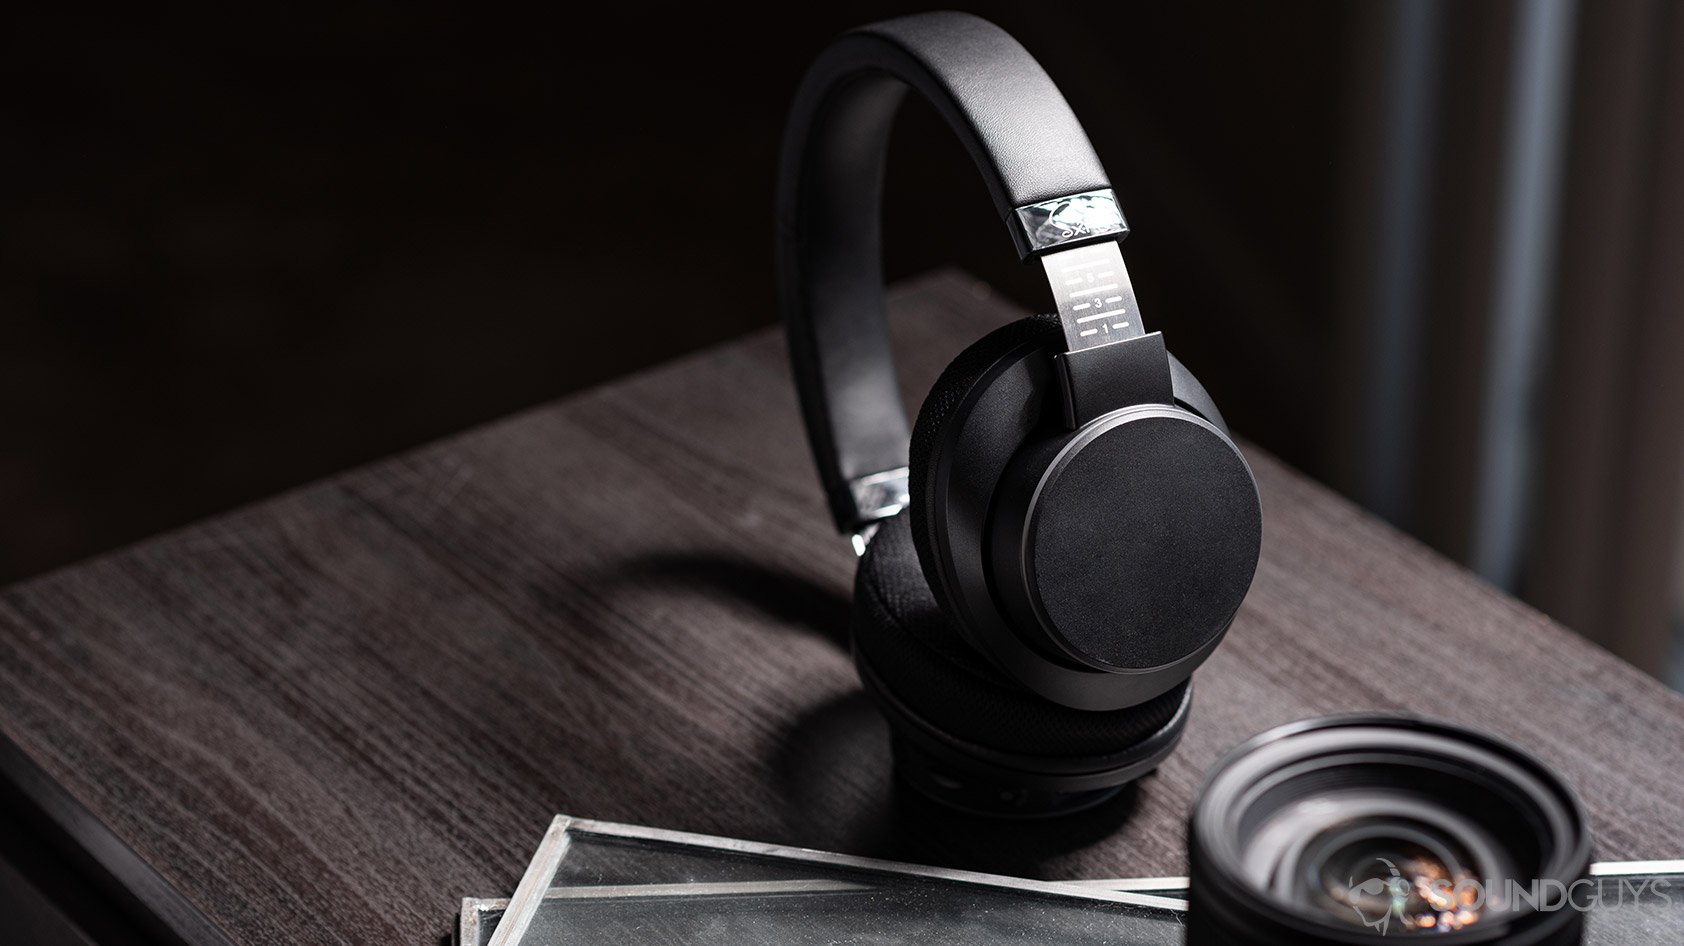 Creative SXFI Air: Headphones standing and angled, completely in frame.